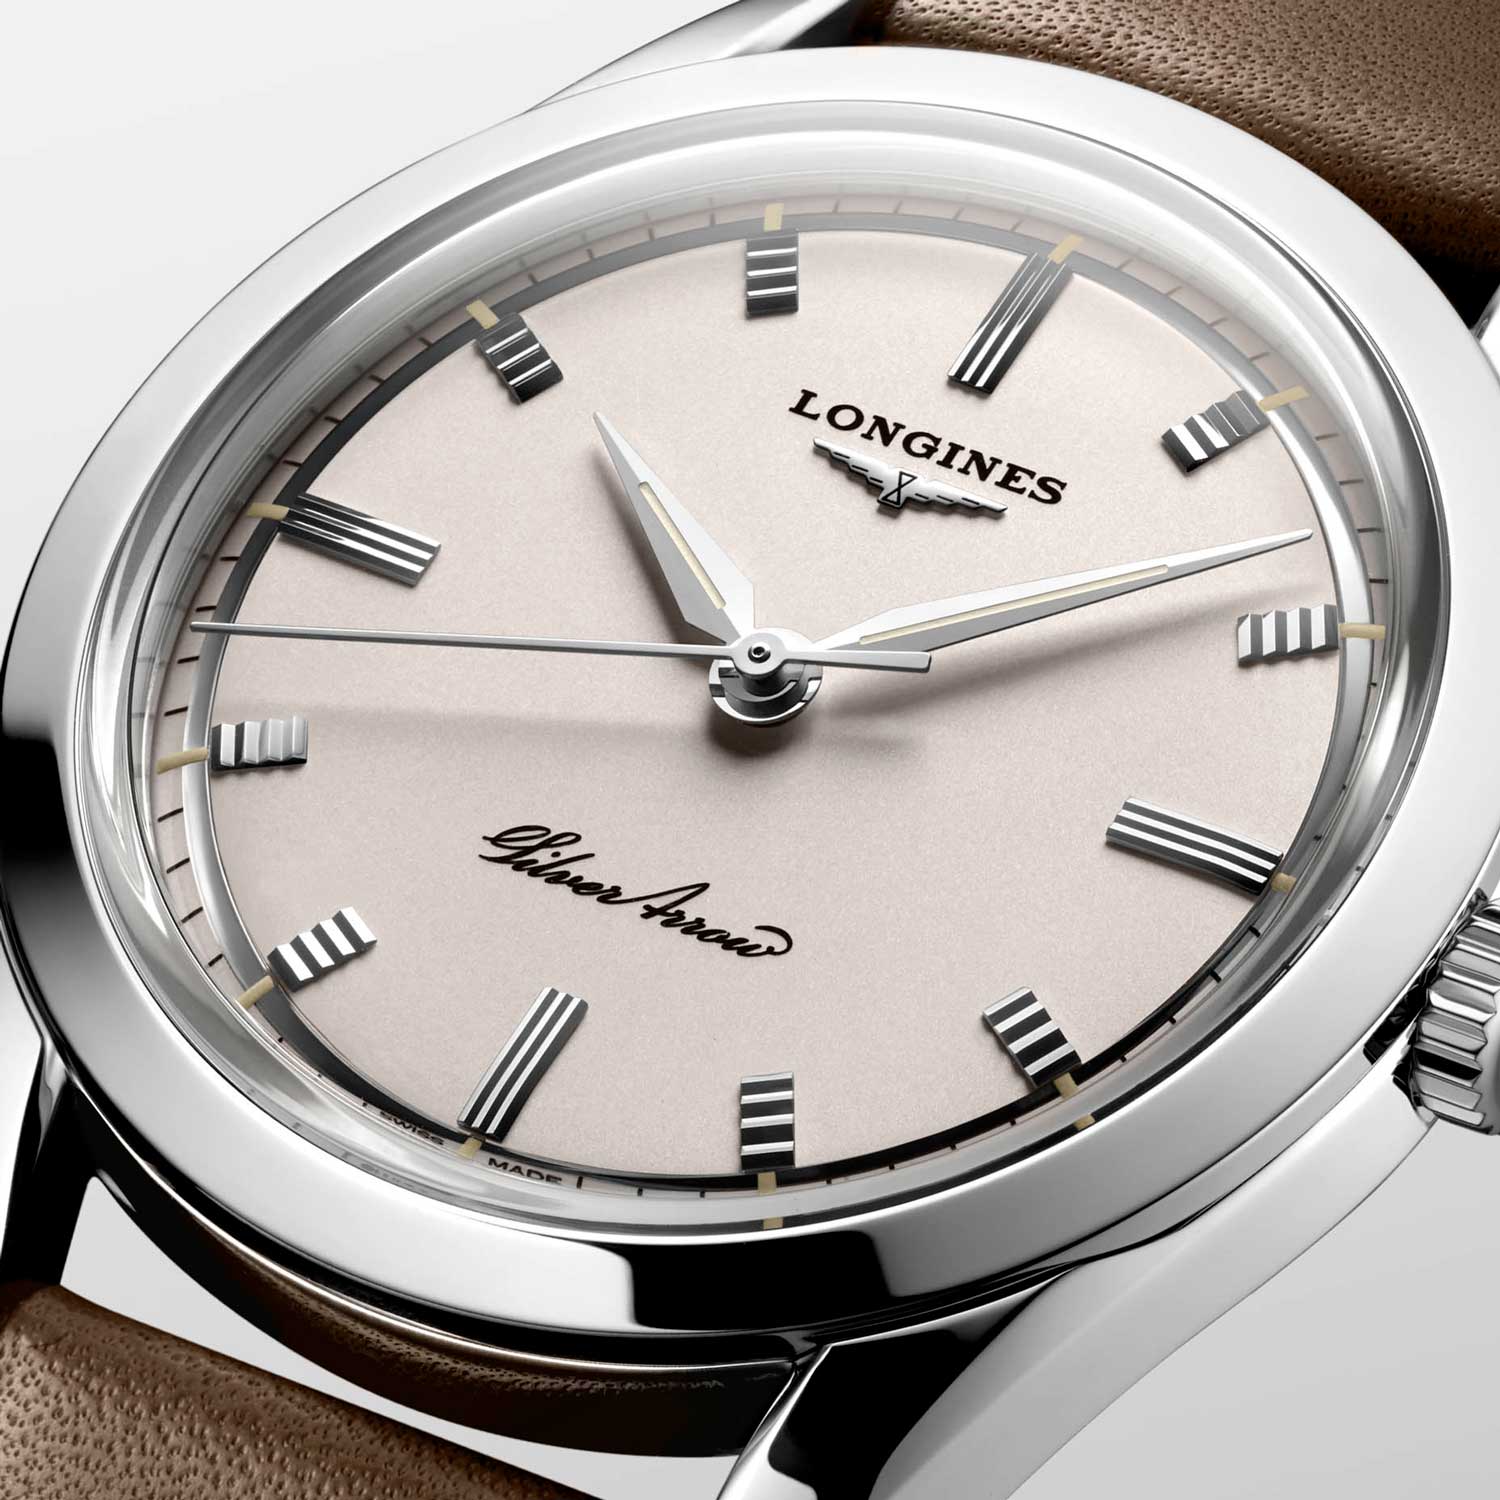 The watch features a stepped dial, vintage style hour markers and sharply edged hour and minute hands